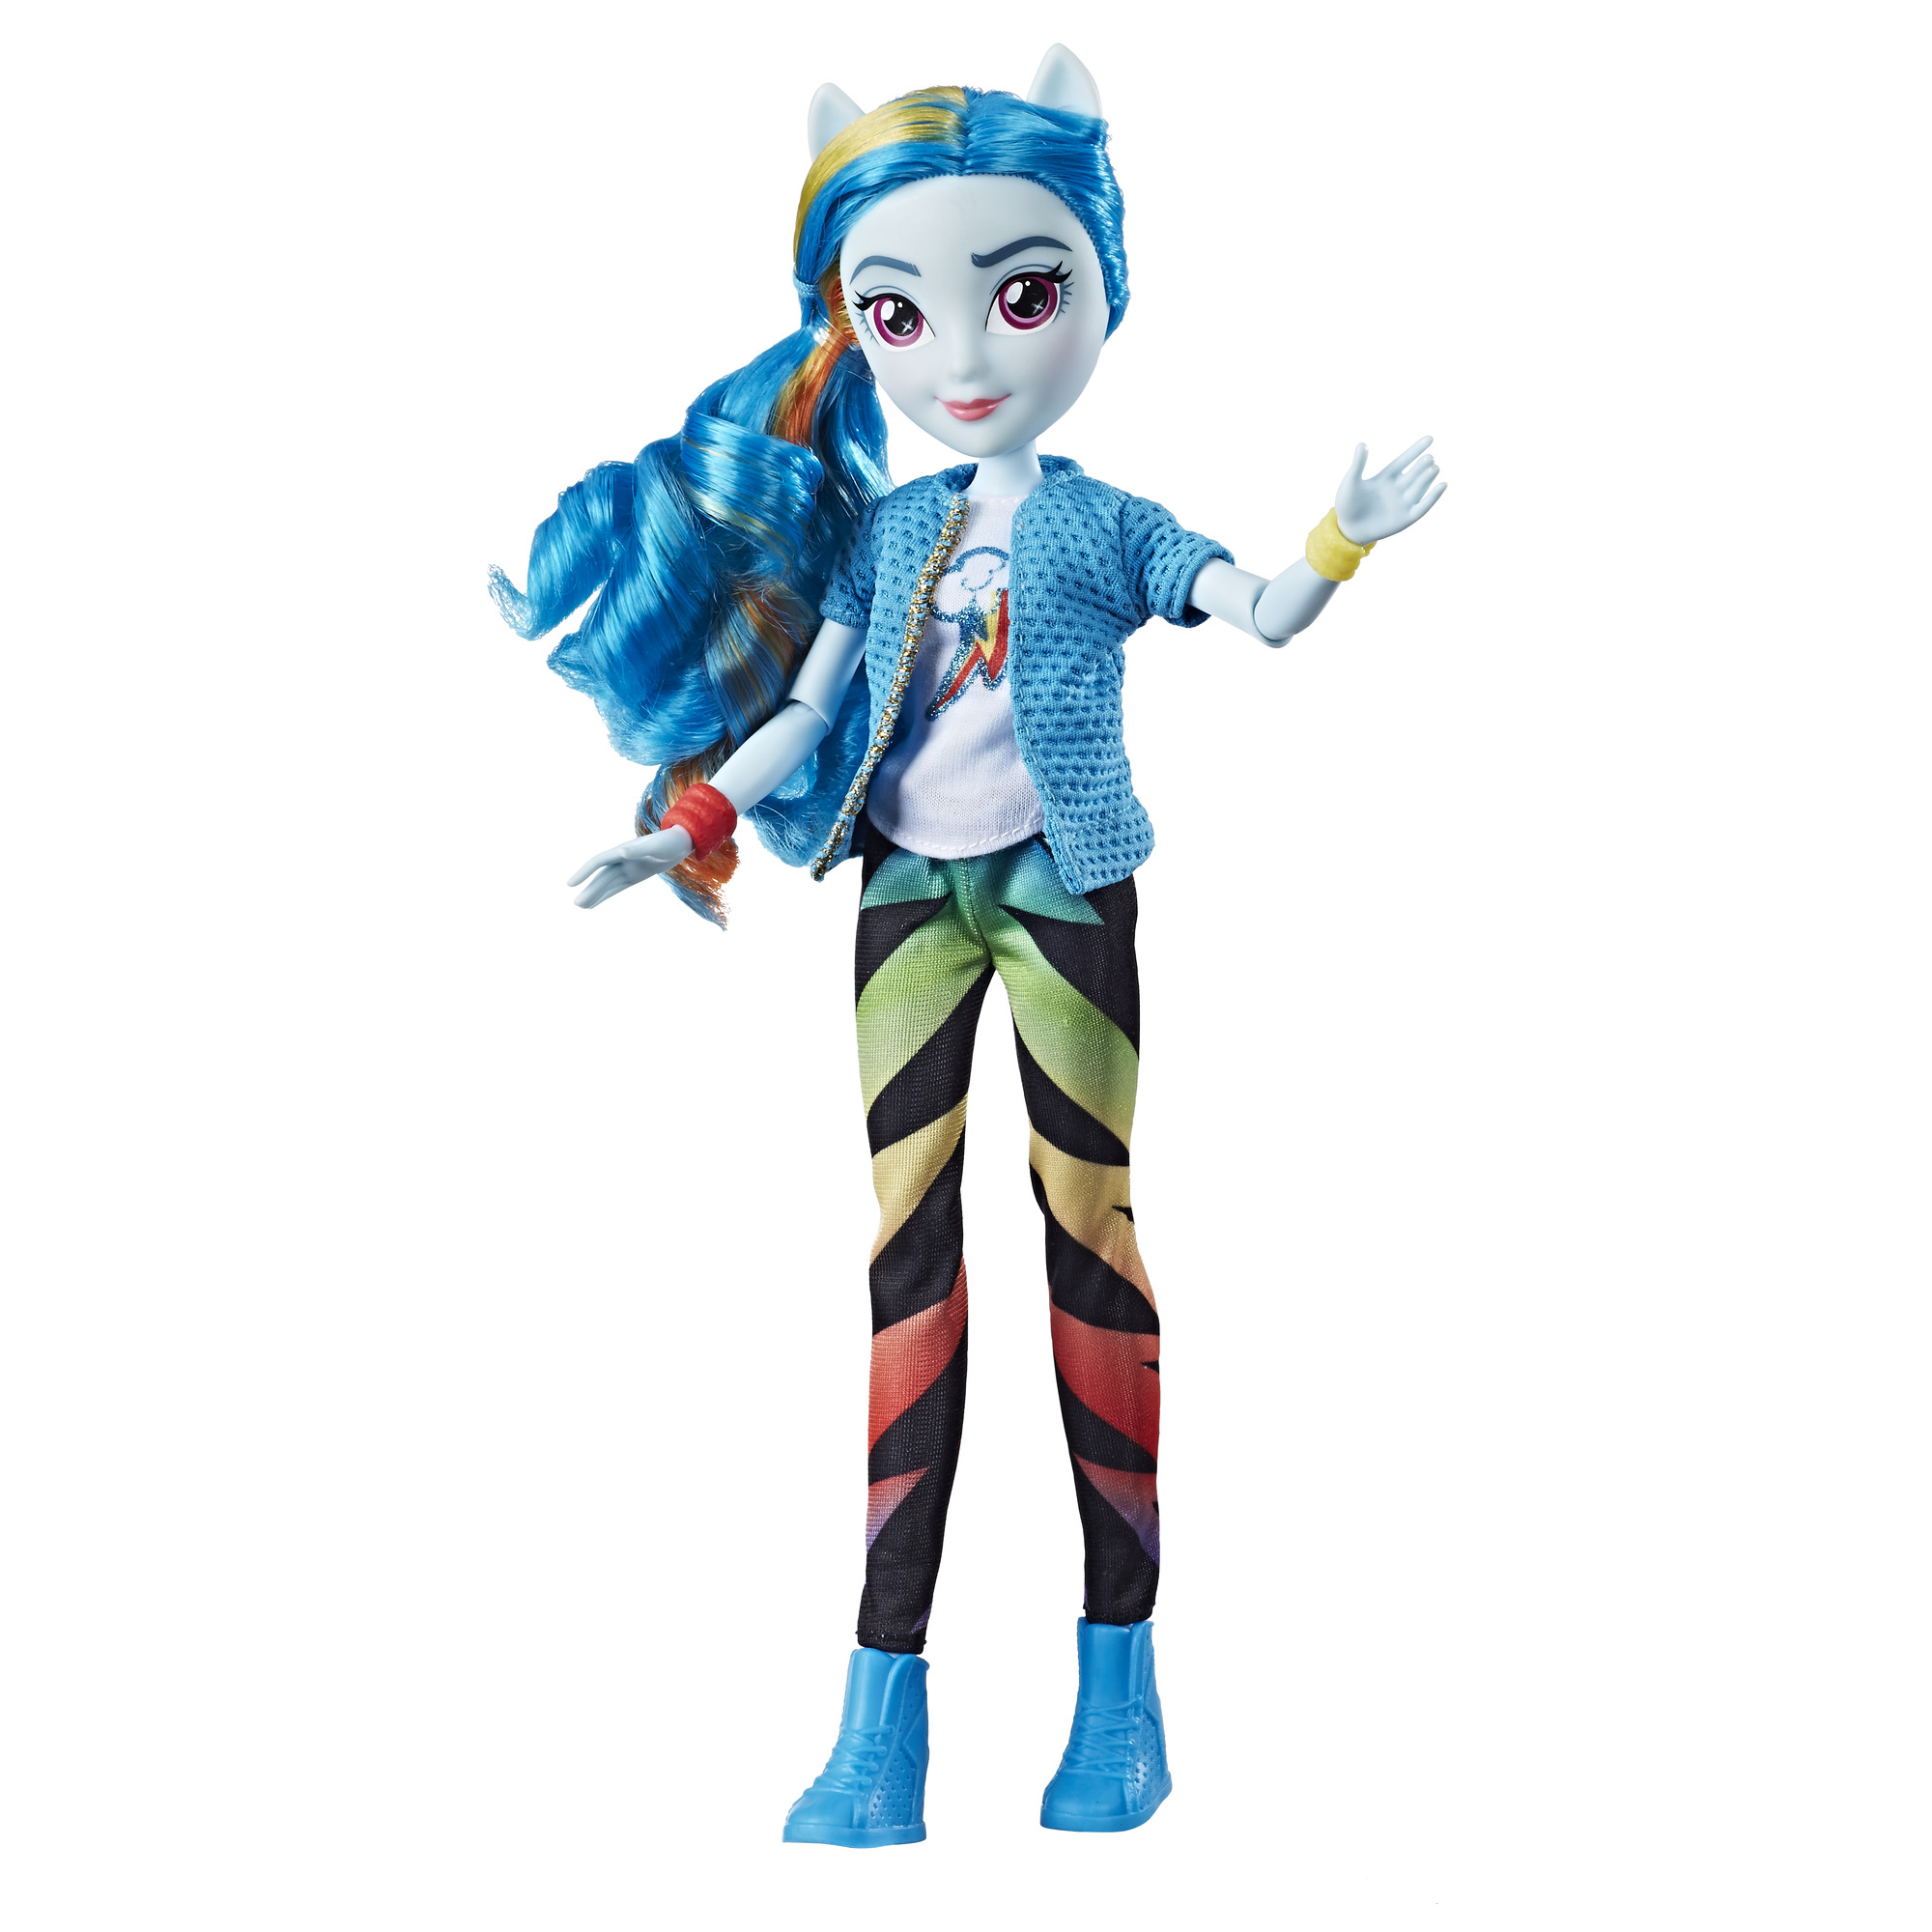 My Little Pony Equestria Girls Rainbow Dash Classic Style Doll - image 1 of 11